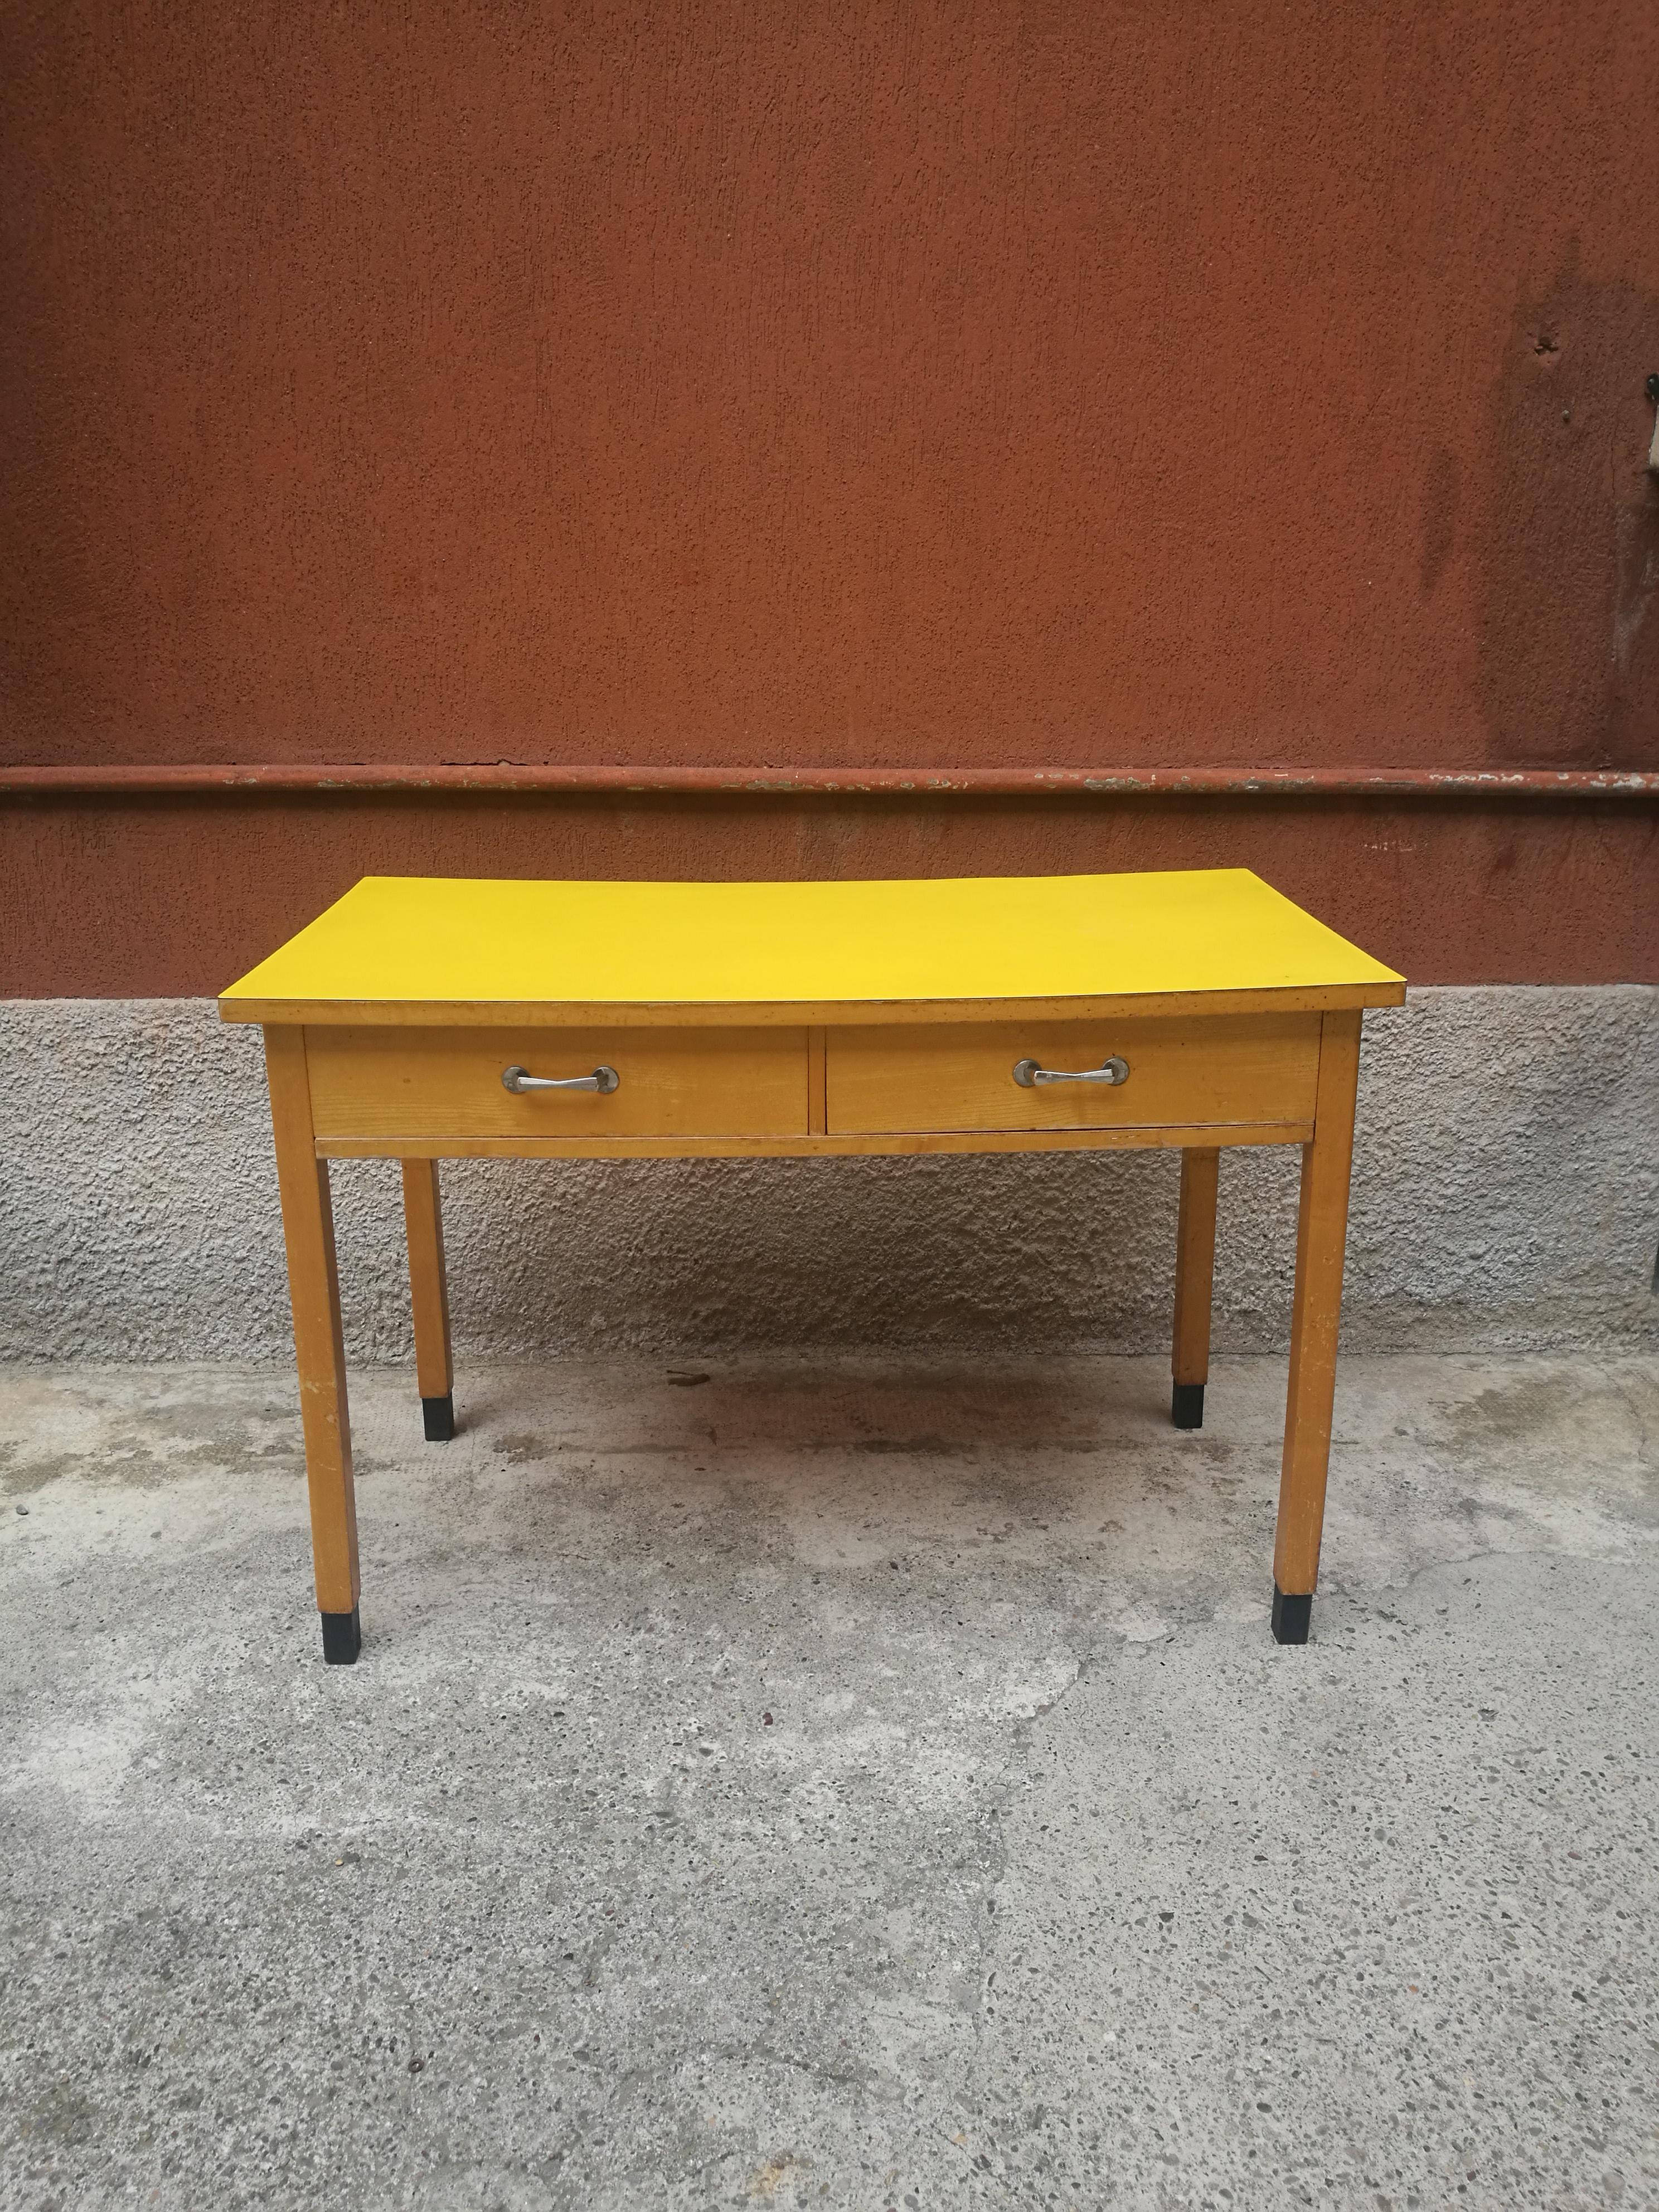 Italian rectangular yellow table with two drawers and chromed handles, 1960
Typical midcentury Italian table, used in kitchen of that time, so surely of rare dimension comparing with standard size of modern products. Its composed by a rectangular